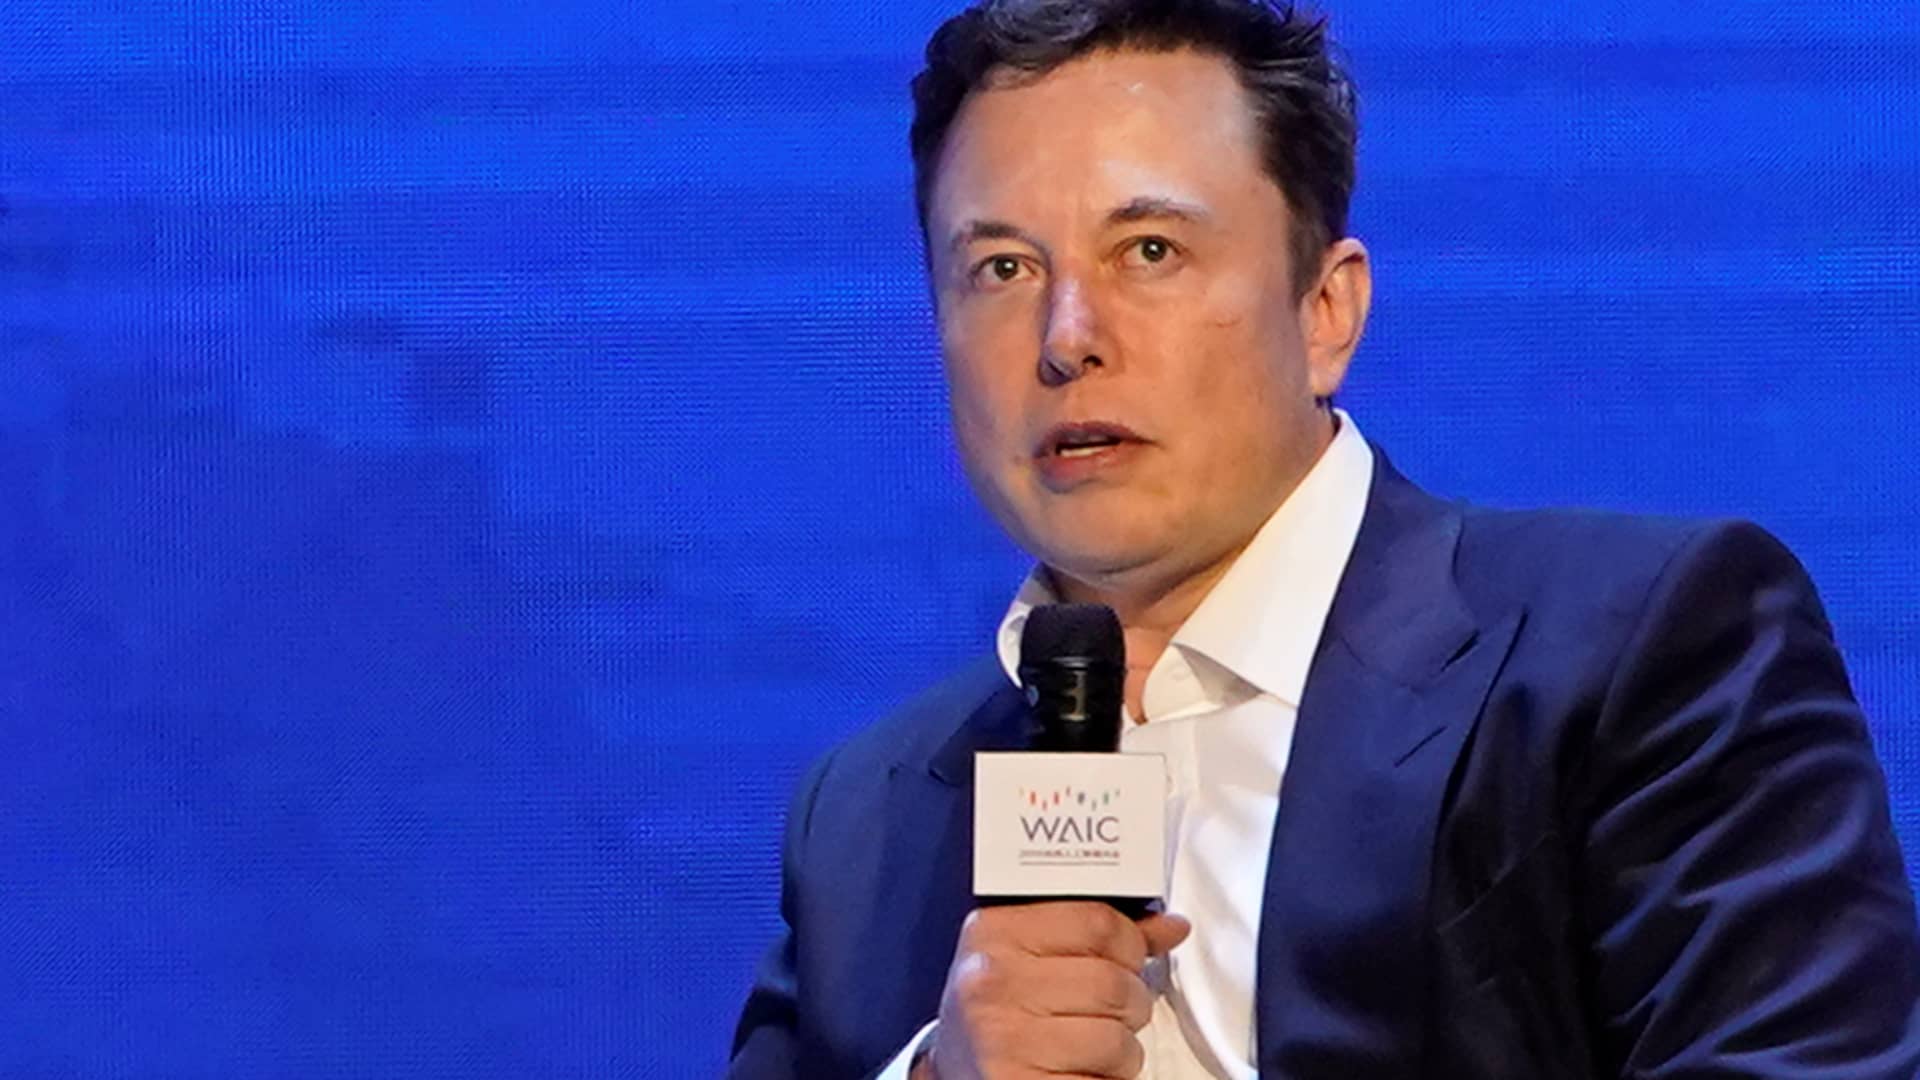 Elon Musk says in court that he doesn't want to be CEO of any company and tries to walk back SEC insults